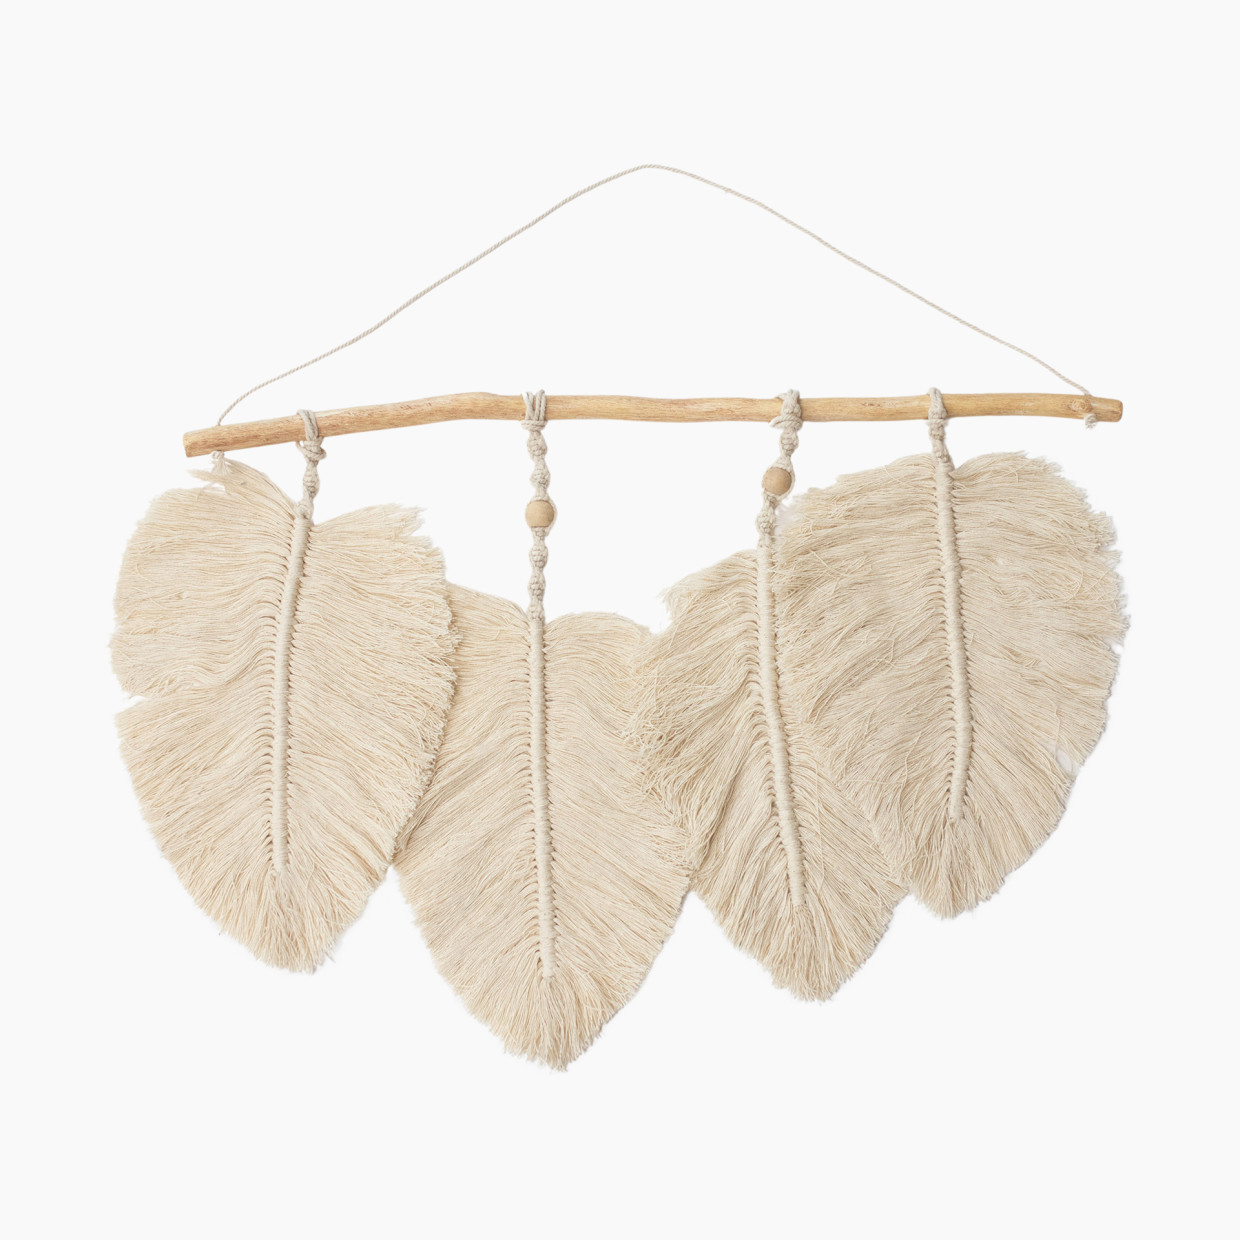 Crane Baby Willow Leaf Wall Decor - Natural.